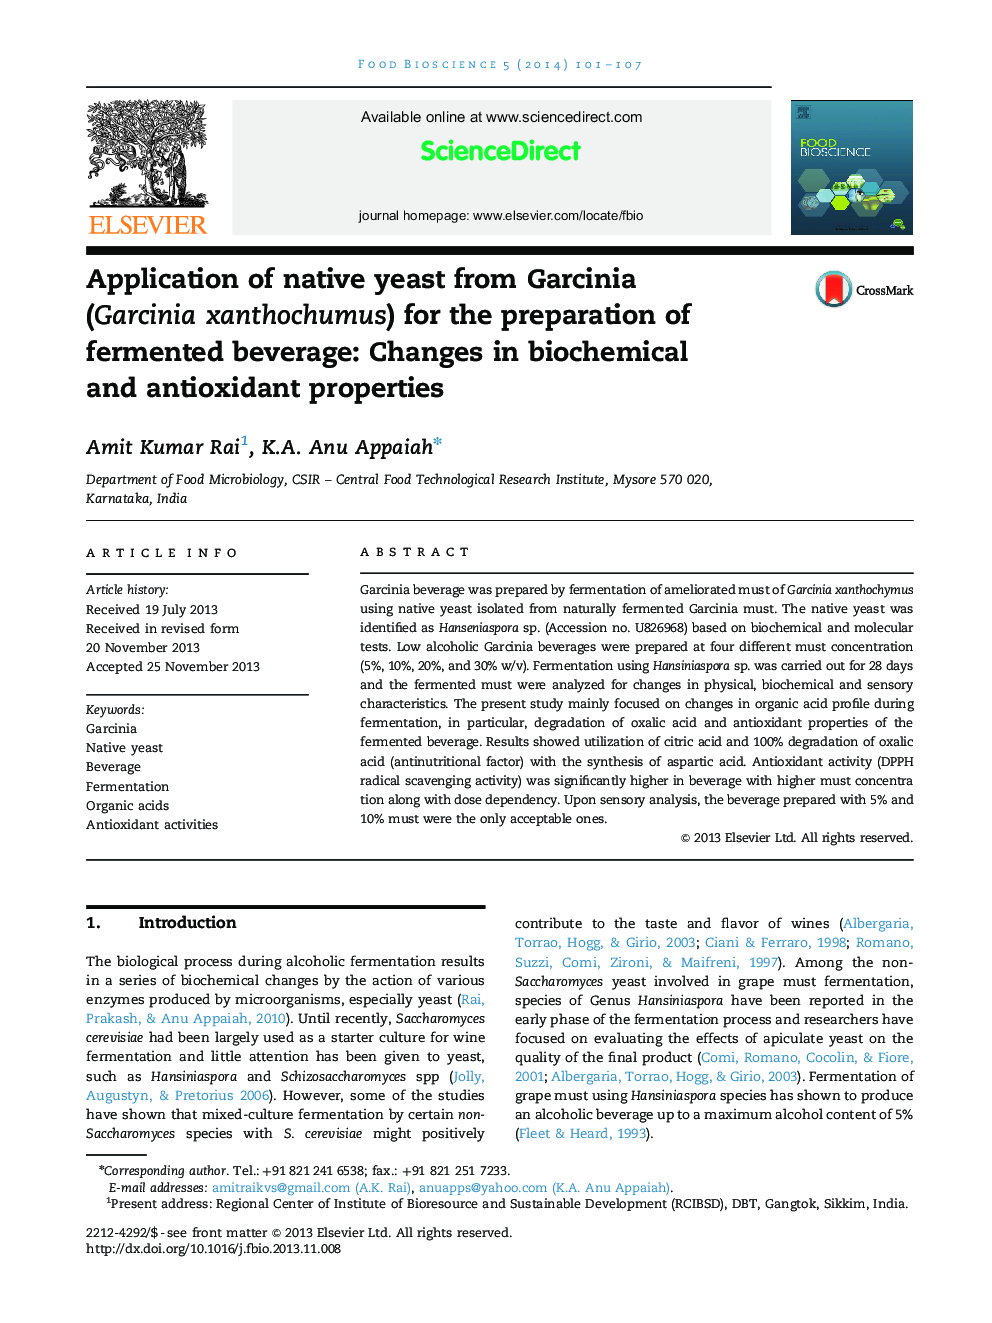 Application of native yeast from Garcinia (Garcinia xanthochumus) for the preparation of fermented beverage: Changes in biochemical and antioxidant properties